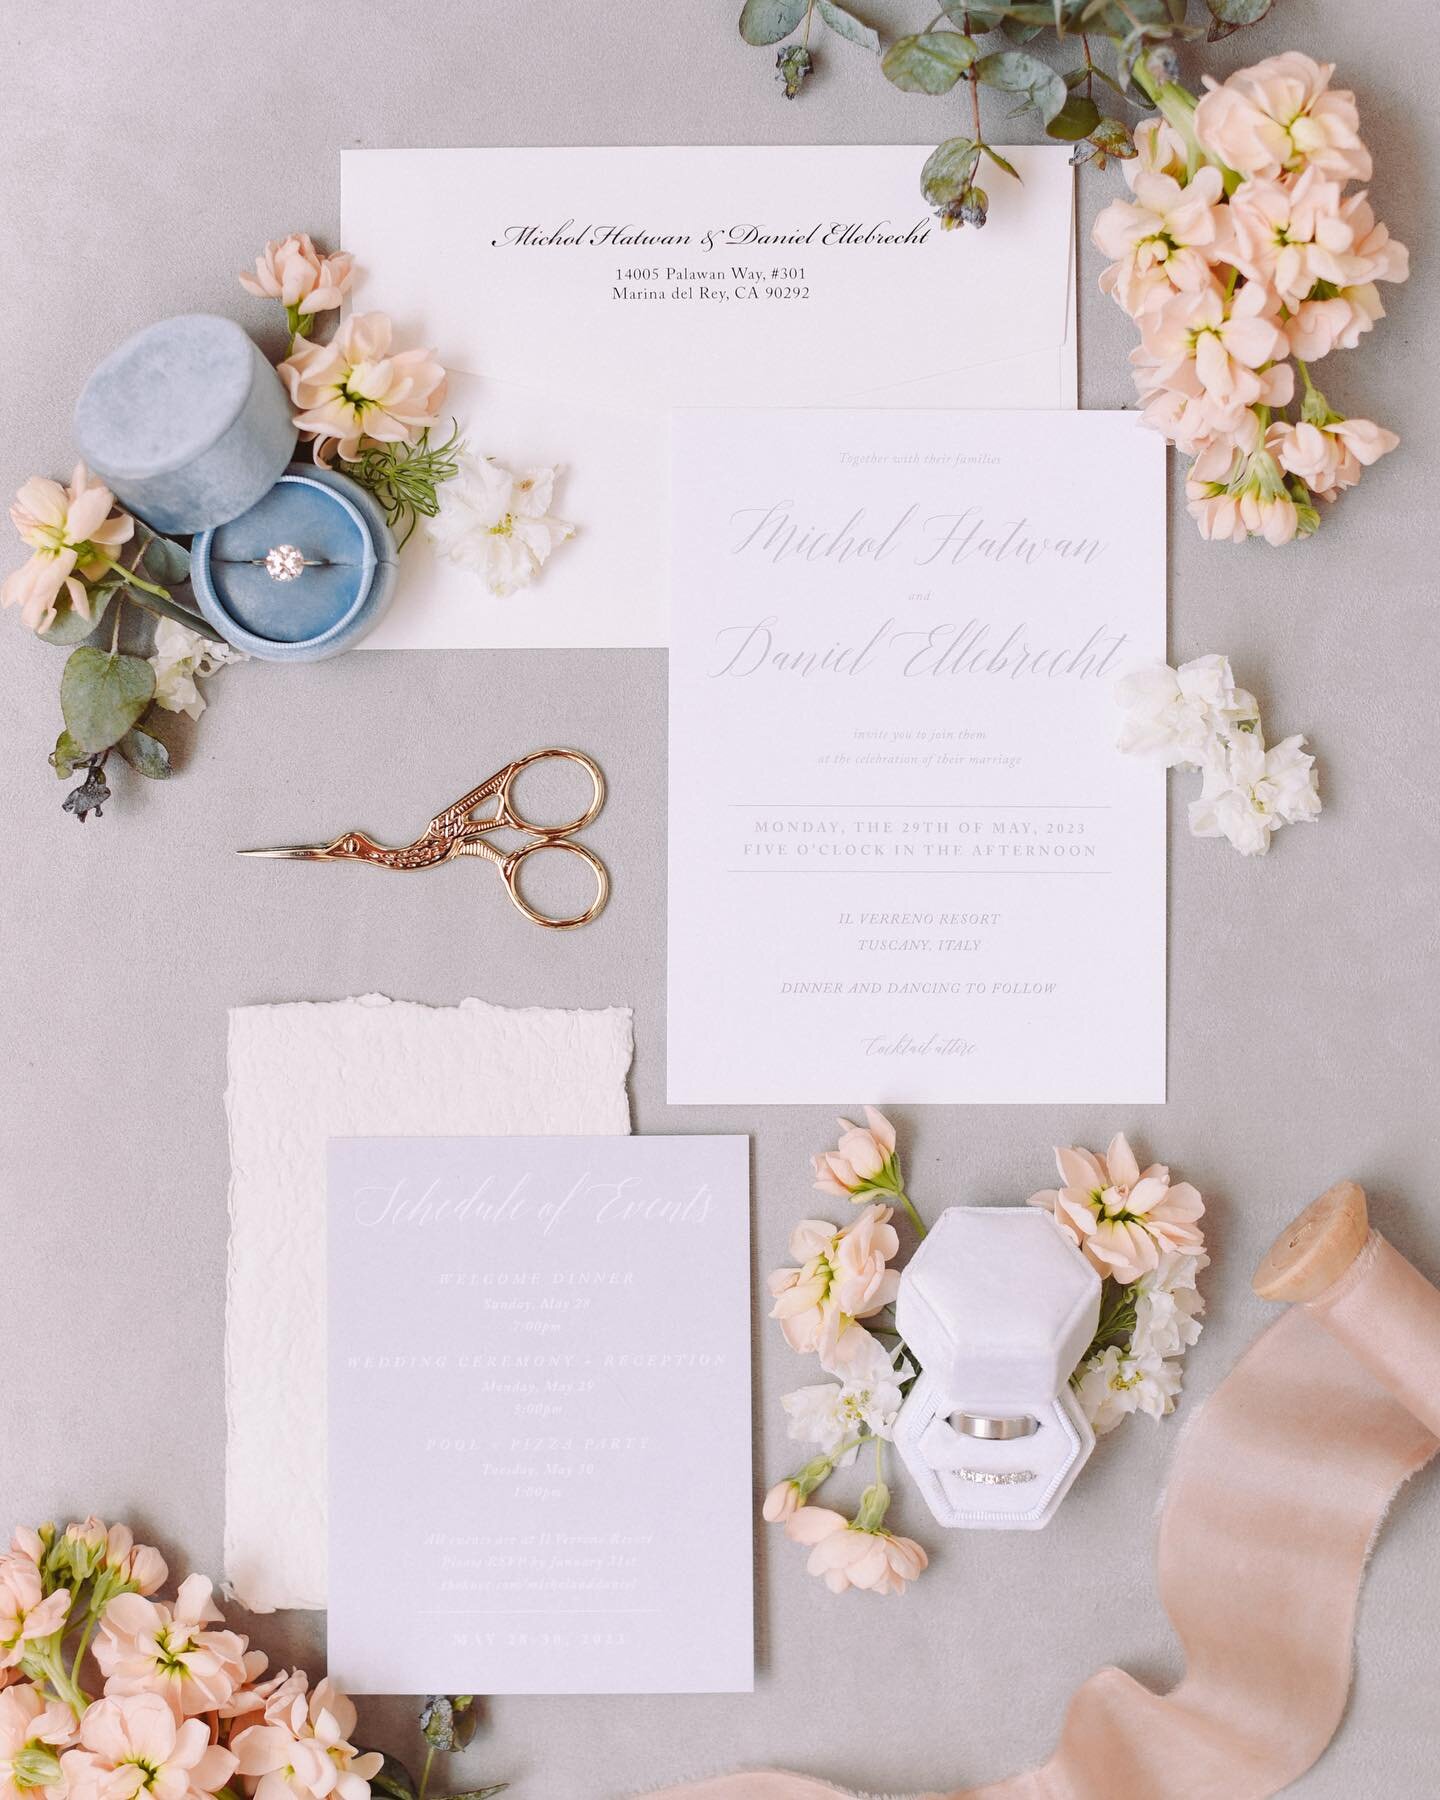 The overall aesthetic of M+D&rsquo;s stationery is refined and sophisticated, evoking a sense of romance and grace. The use of delicate tones, calligraphy together with high quality paper creates timeless and classy invitations that sets the tone of 